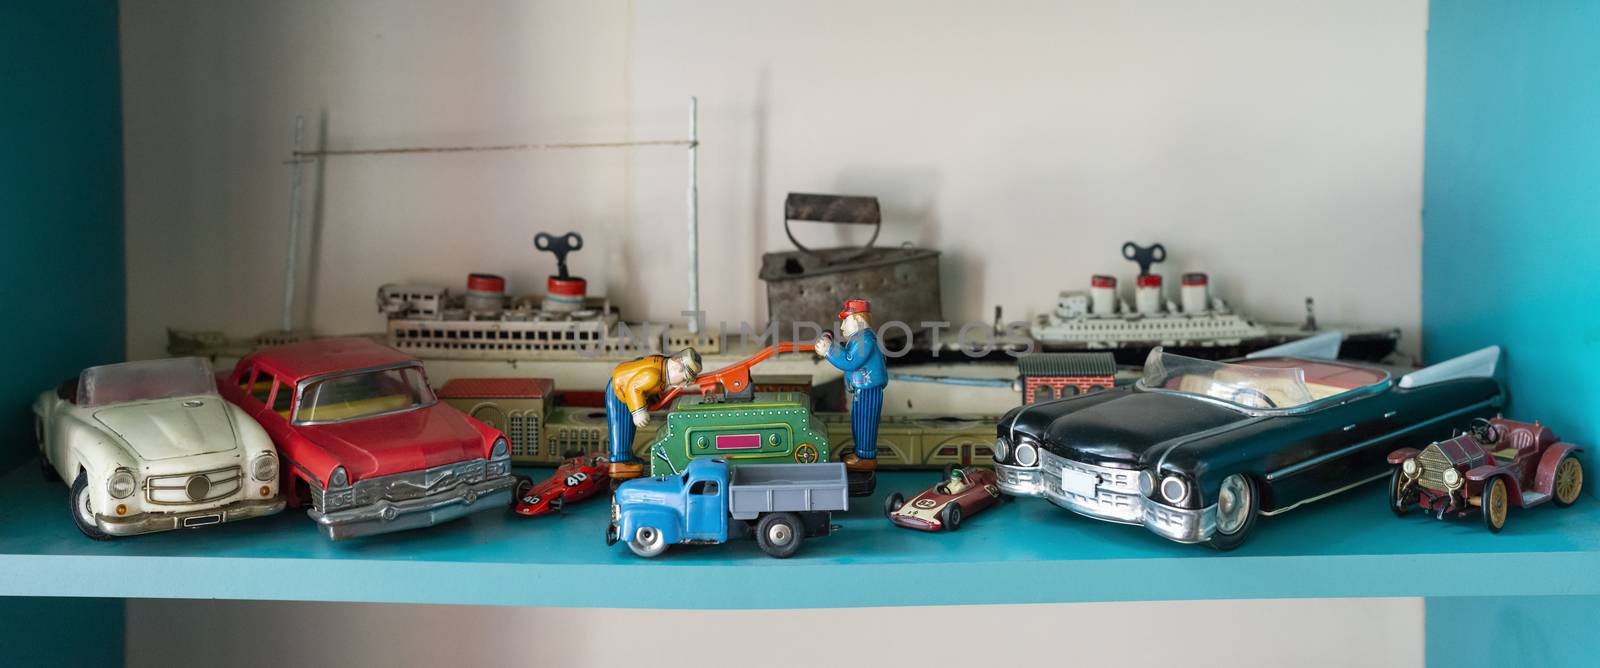 Old vintage toys on shelf. Collection of vintage cars toys in a shop. Bright colours.